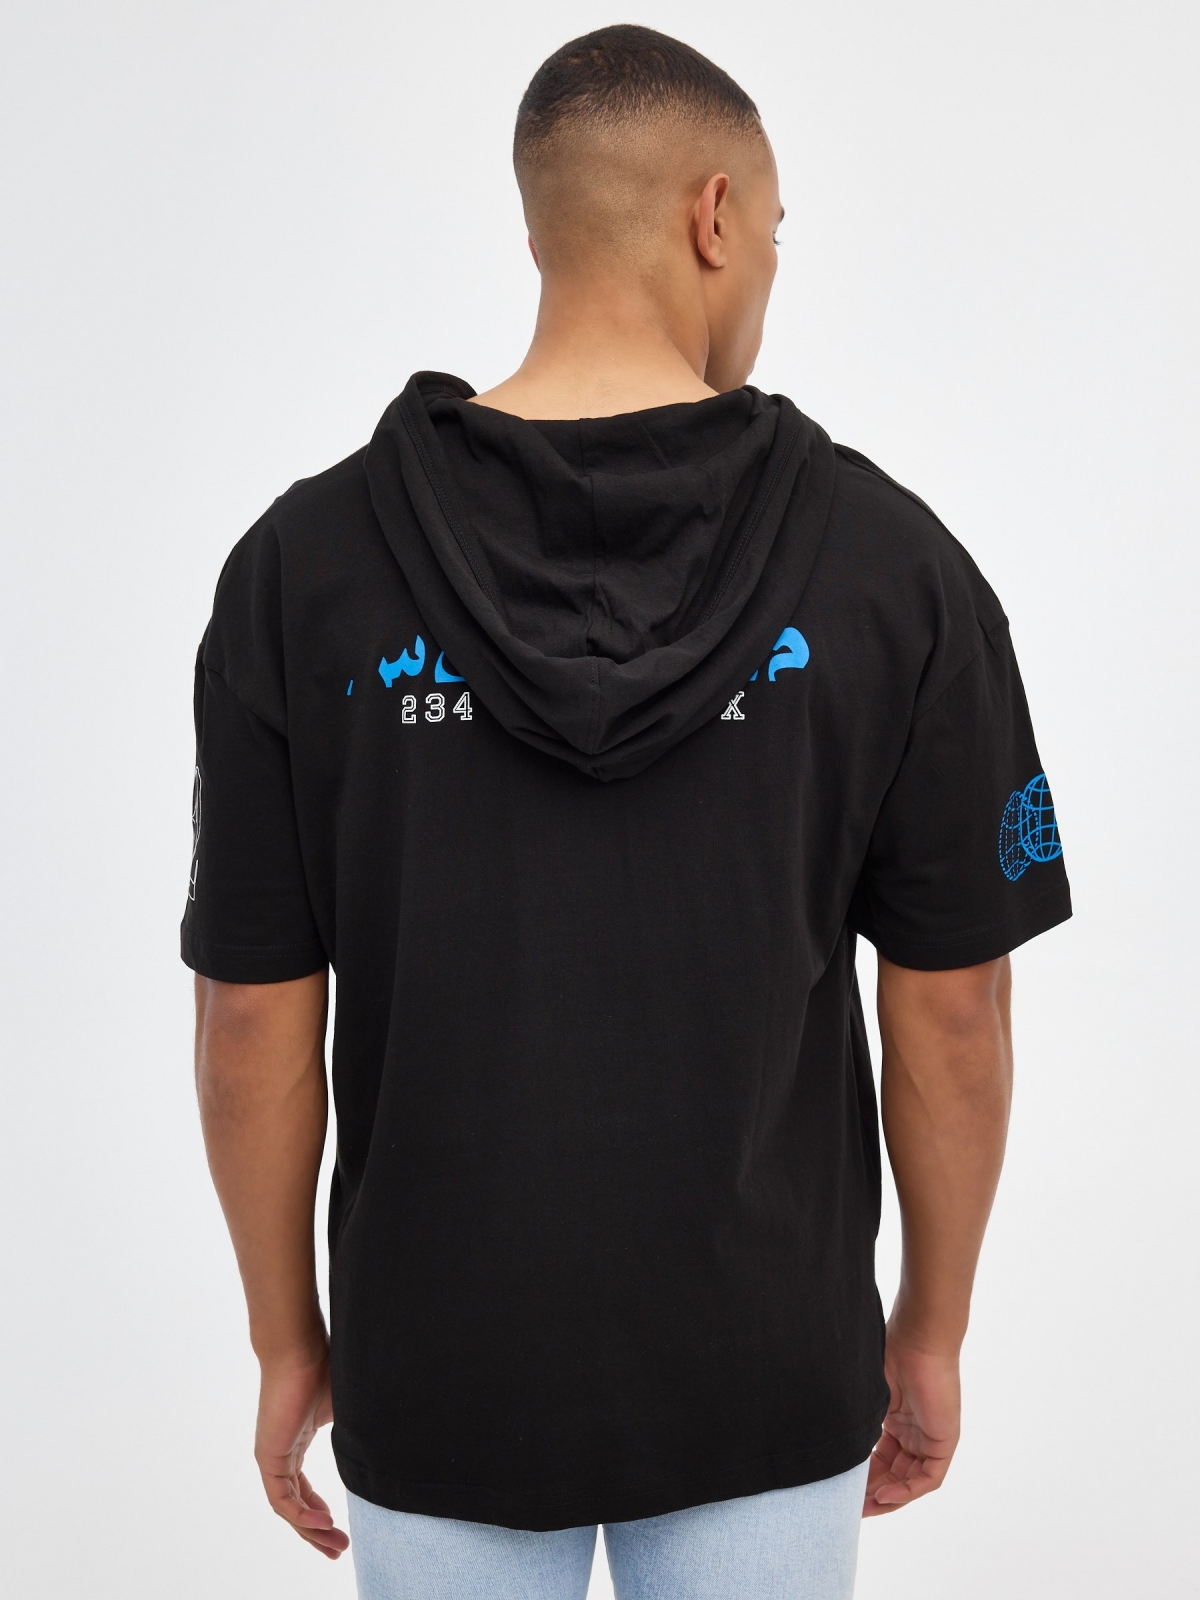 Worldwide T-shirt with hood black middle back view